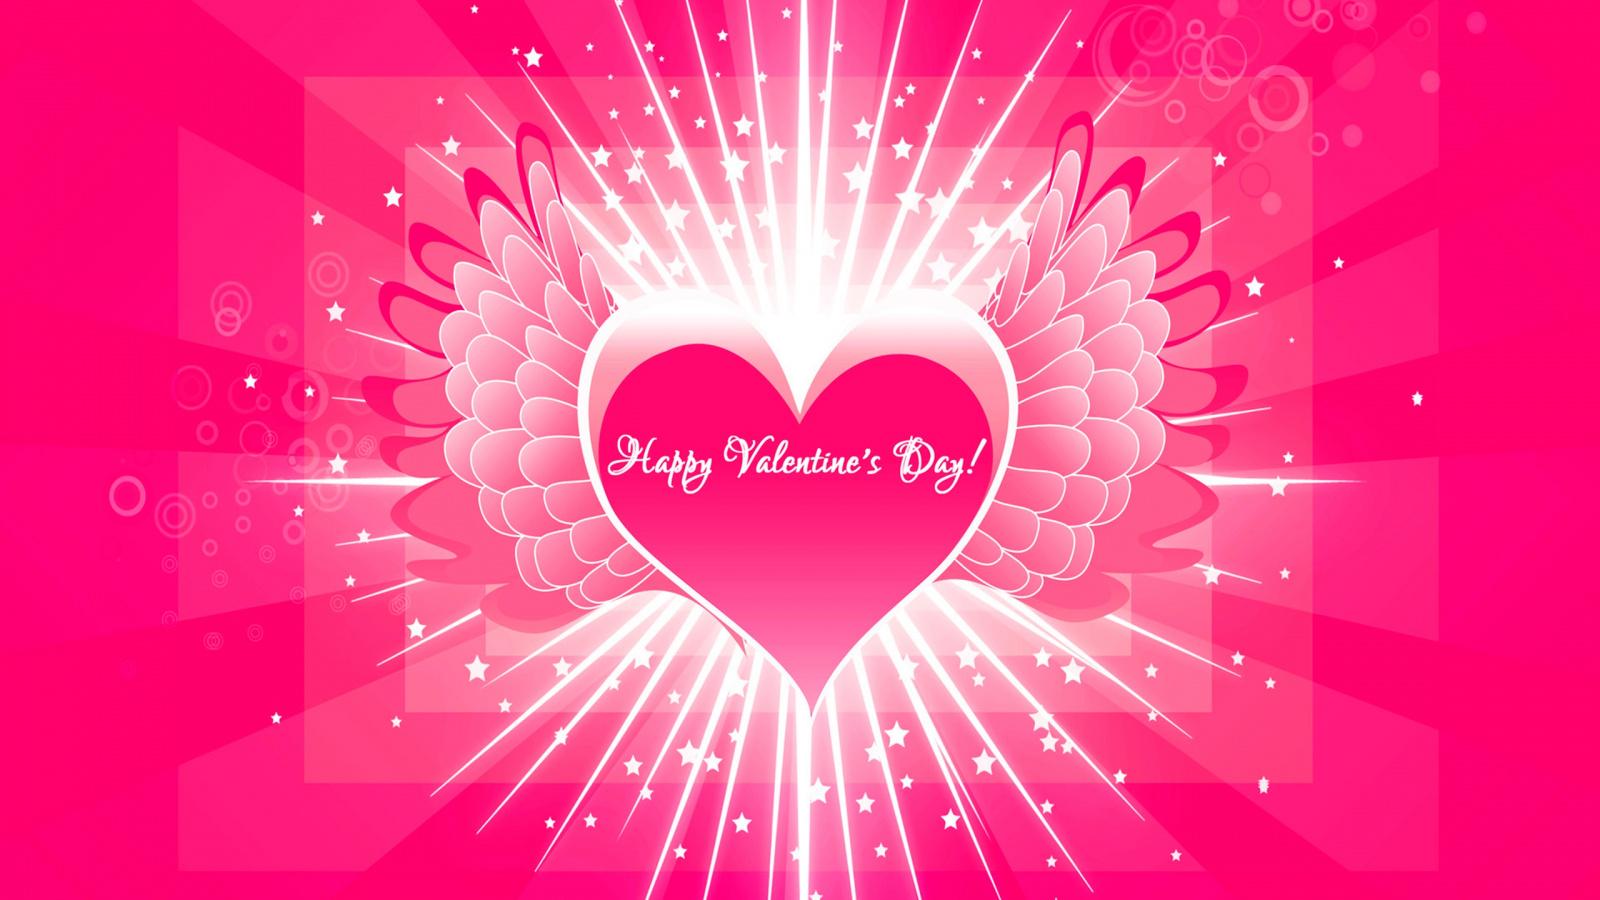 Download Heart, abstract, Valentine's Day, art